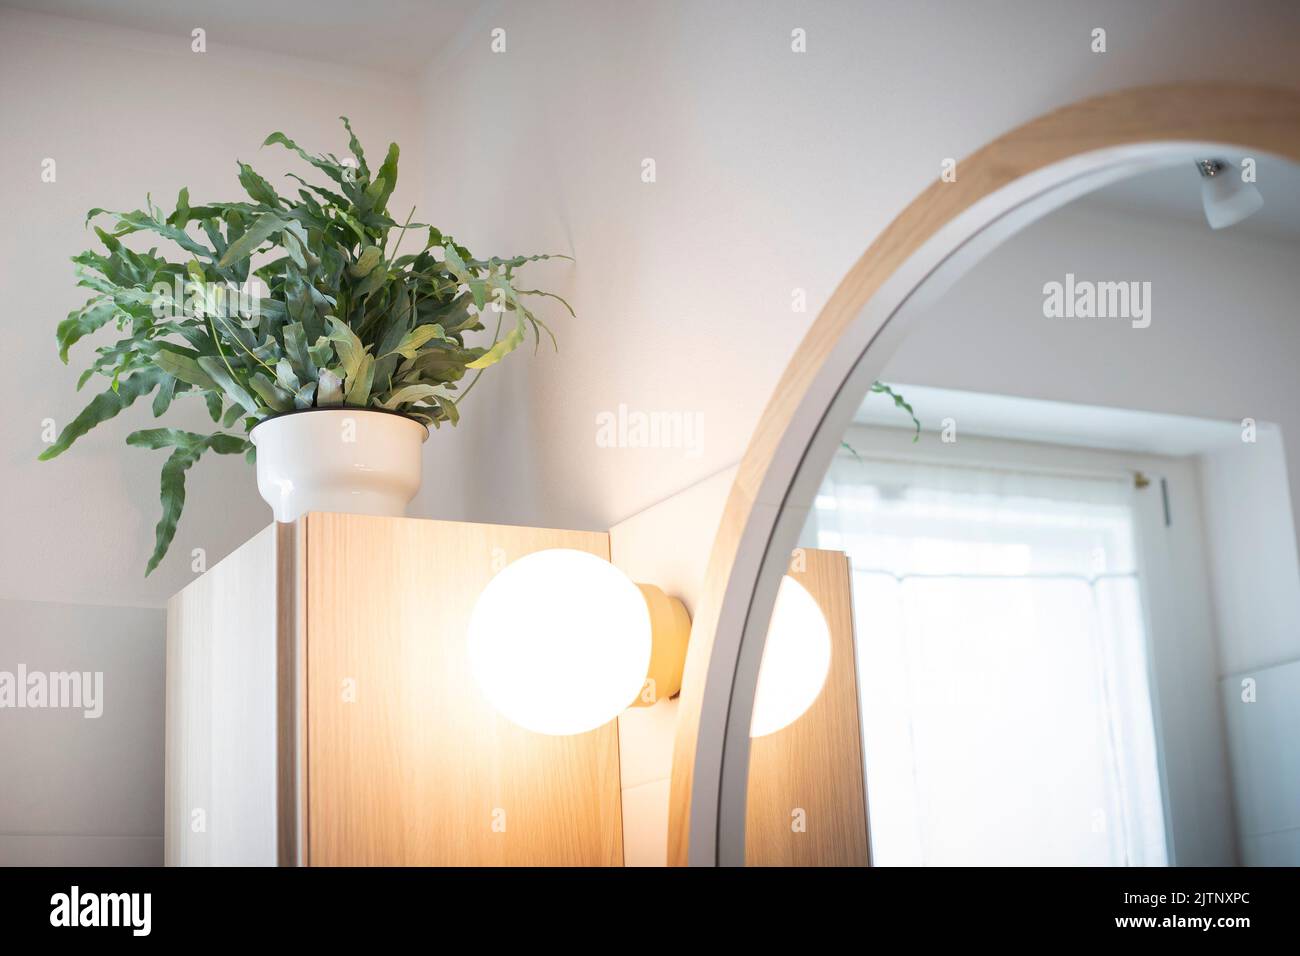 A plant of Blue Star fern (Phlebodium aureum), a fancy houseplant, on top of a wooden cabinet in  a bathroom with a round mirror. Stock Photo